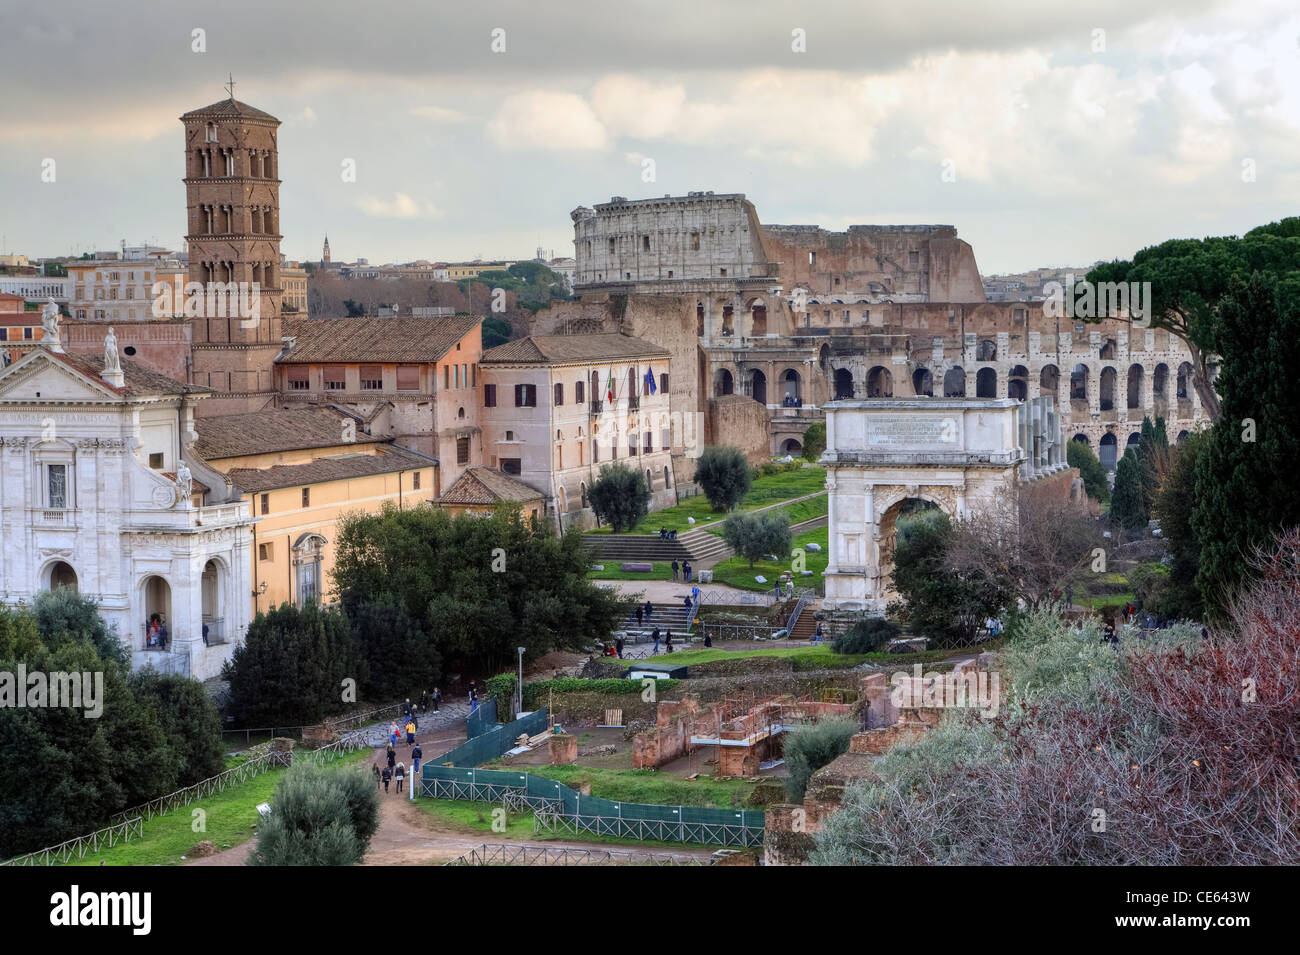 View of the Colosseum in Rome, Lazio, Italy with the Arch of Titus and the church of Santa Francesca Romana Stock Photo